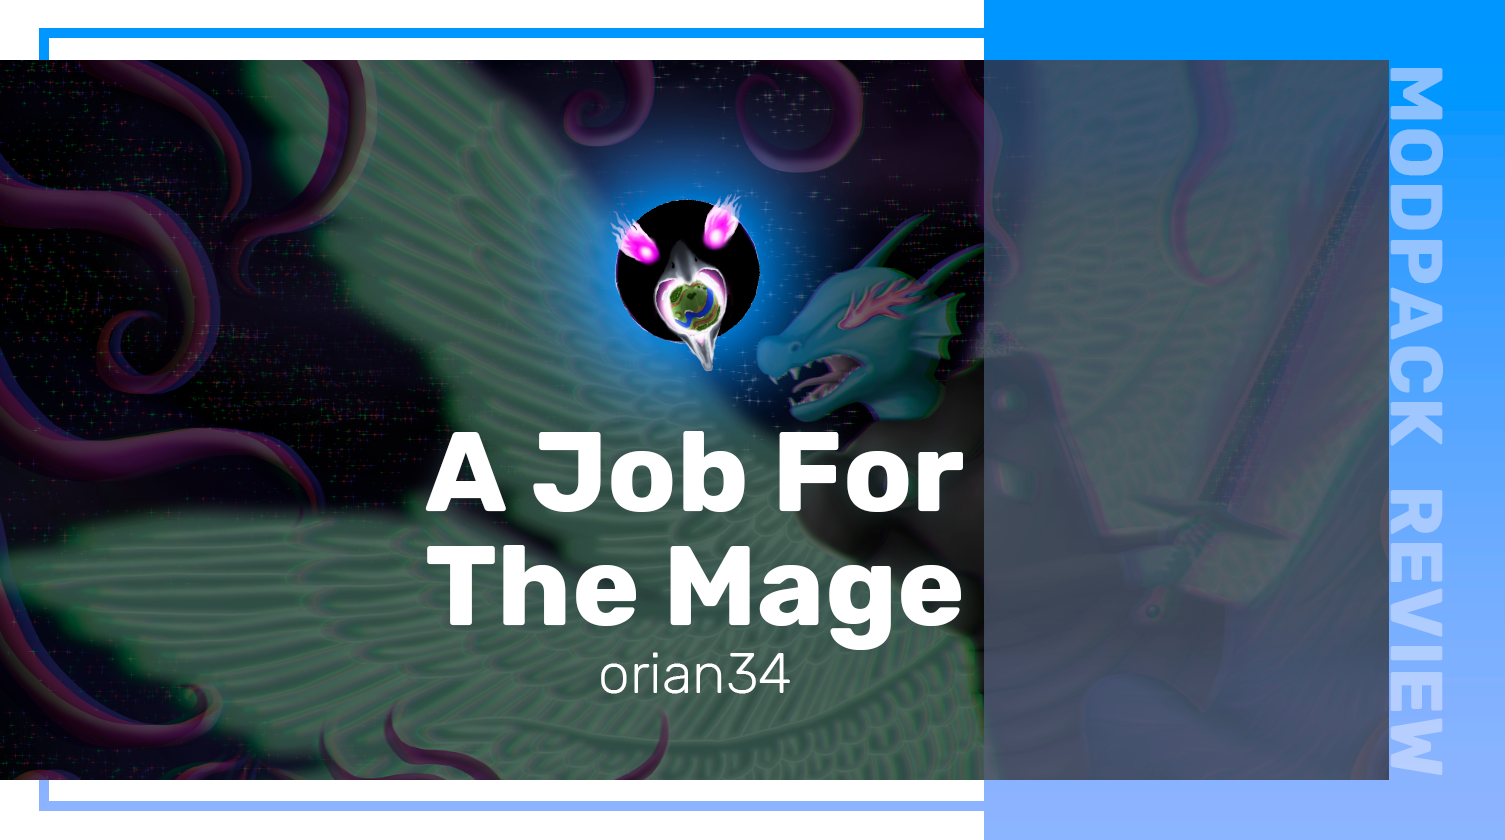 Walking Through A Job for the Mage – Flashback Edition